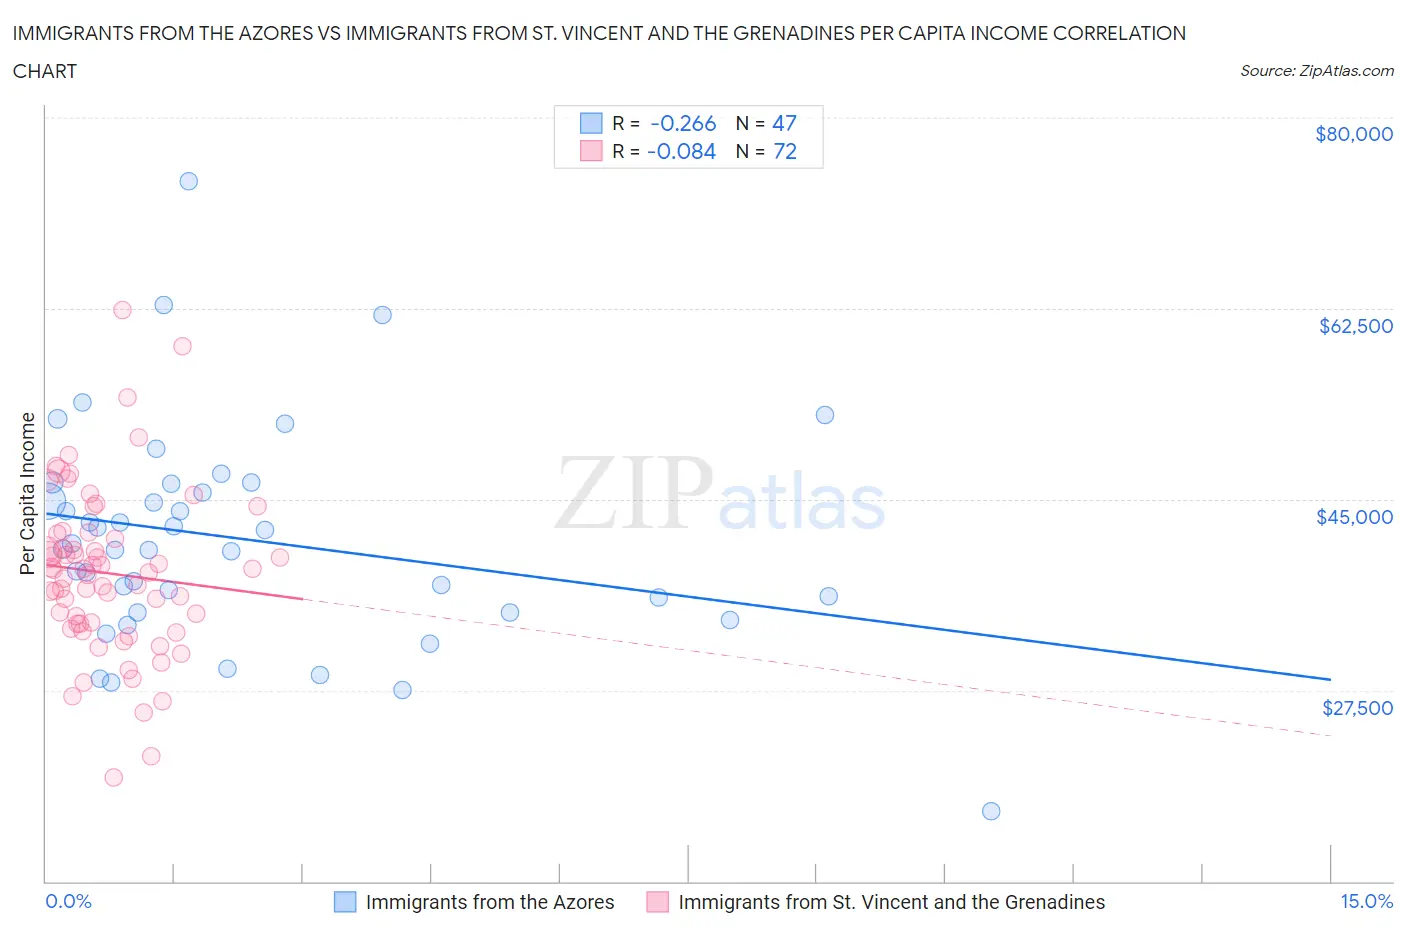 Immigrants from the Azores vs Immigrants from St. Vincent and the Grenadines Per Capita Income